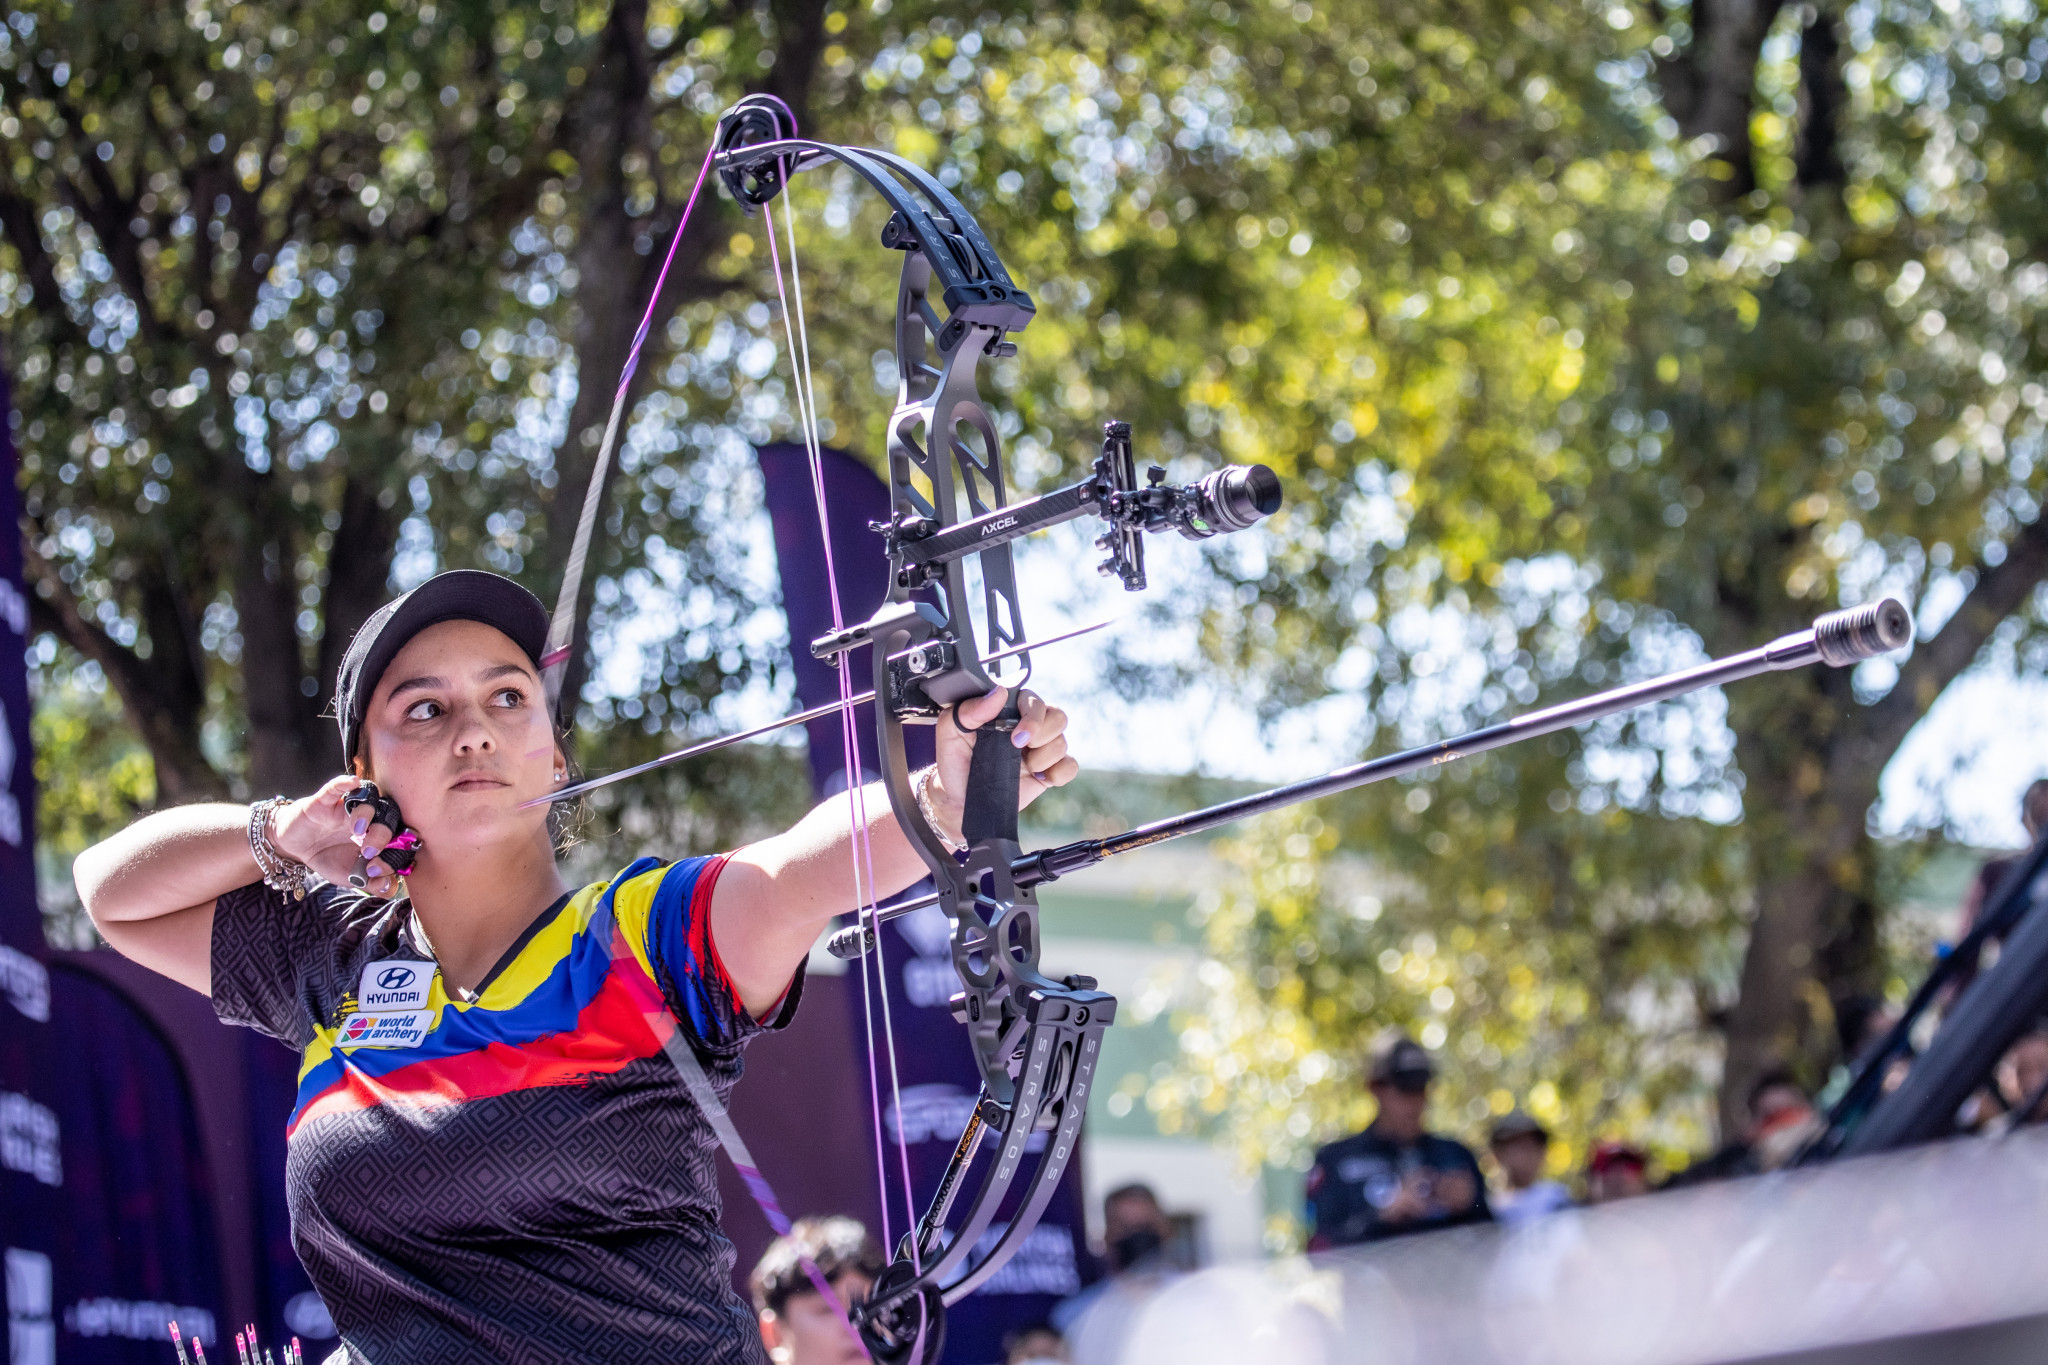 Colombia's Sara Lopez is among the stars set to compete in the compound competition at the Archery World Cup in Antalya ©Getty Images